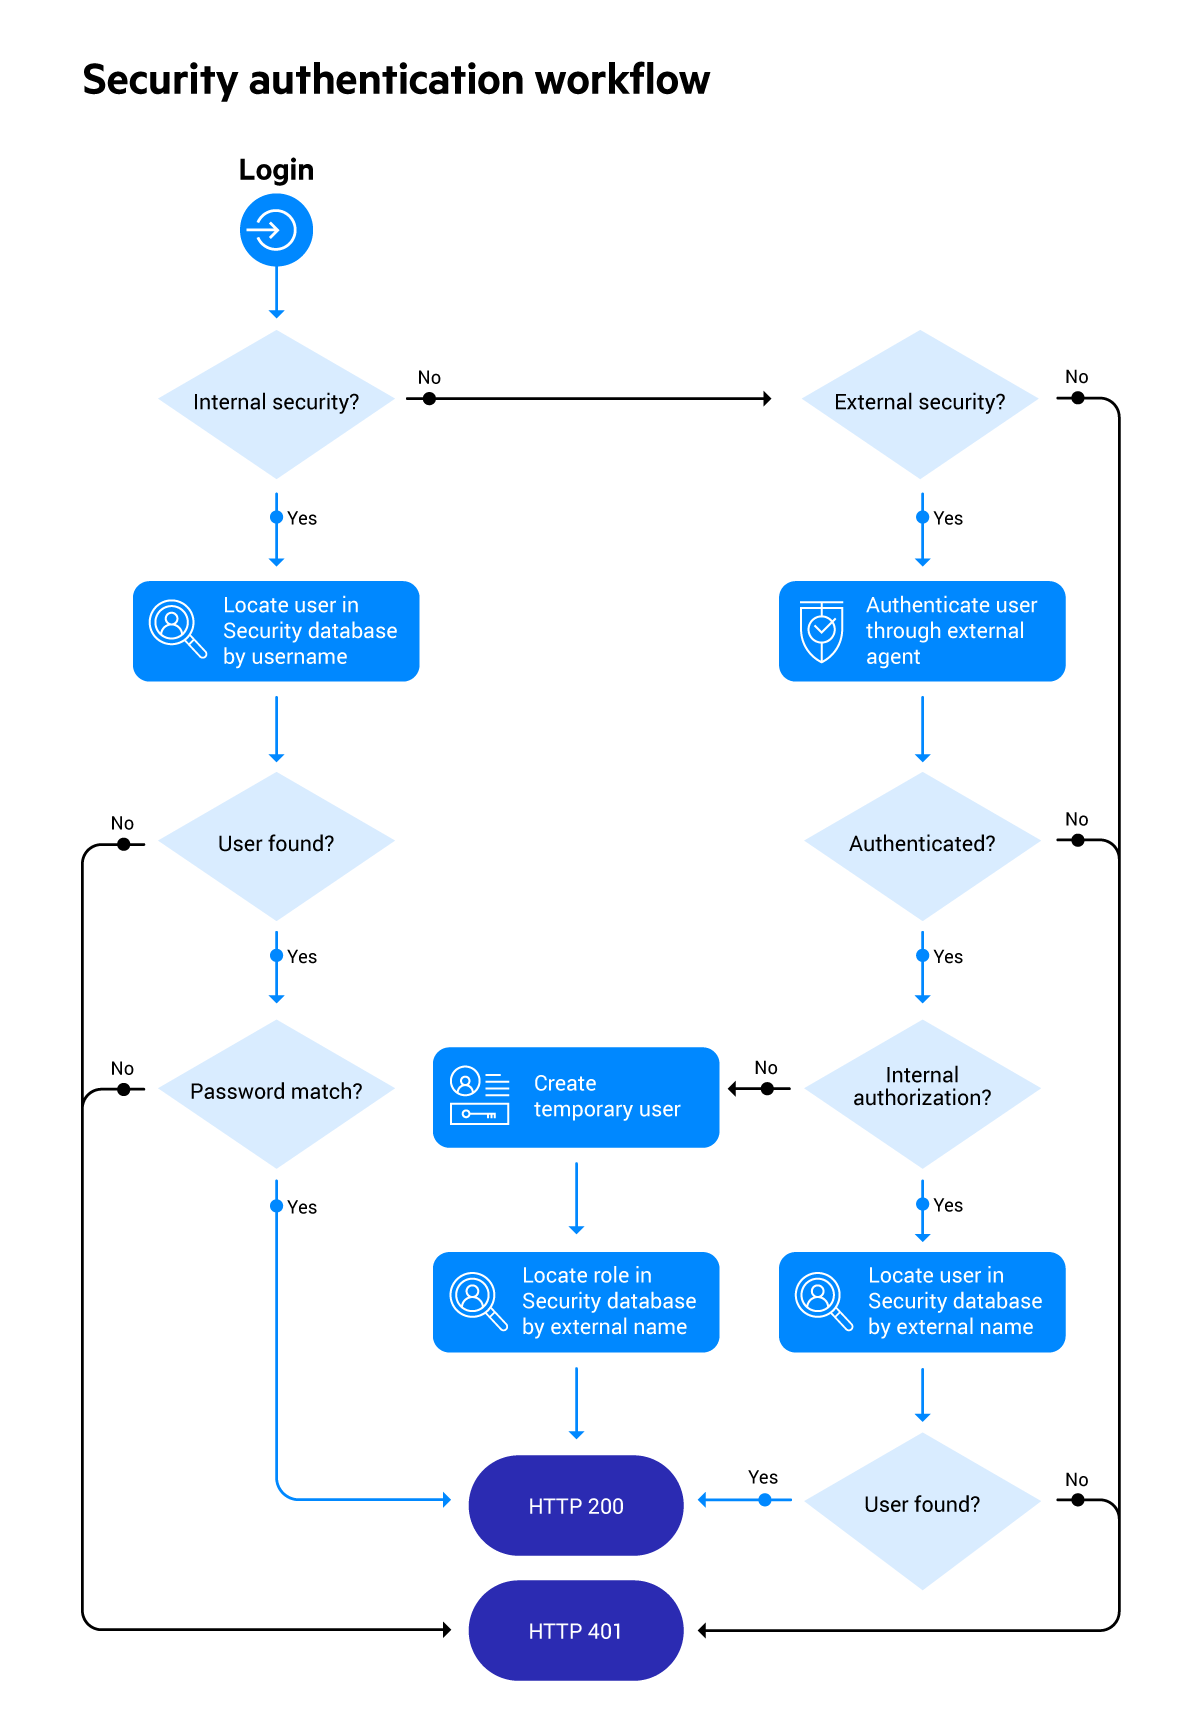 Flowchart of security authentication workflow